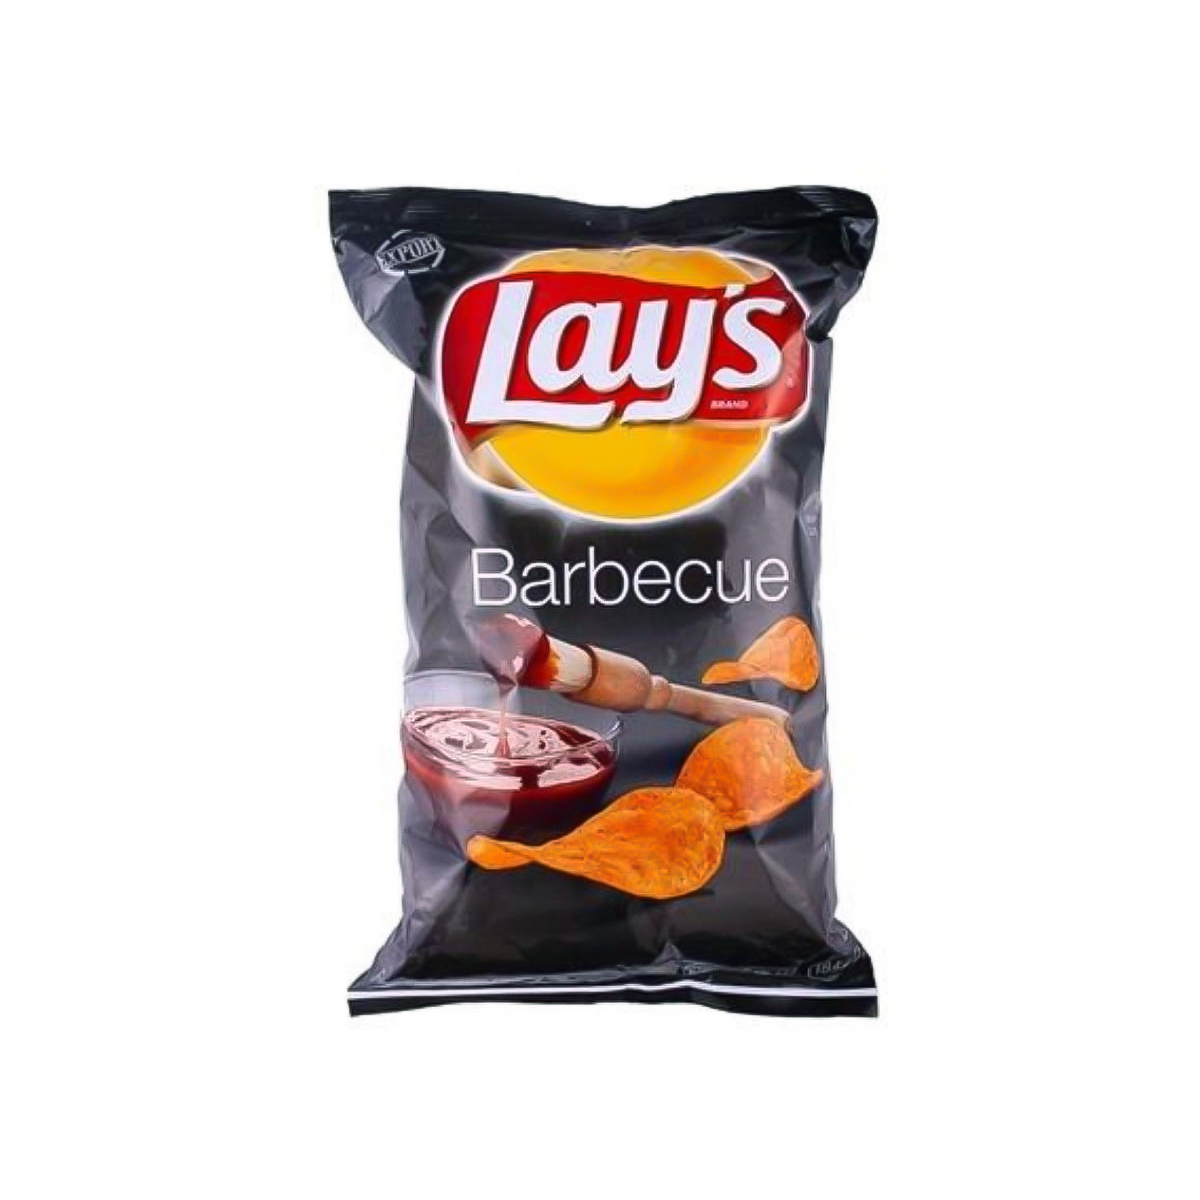 Lay's Barbecue 170g